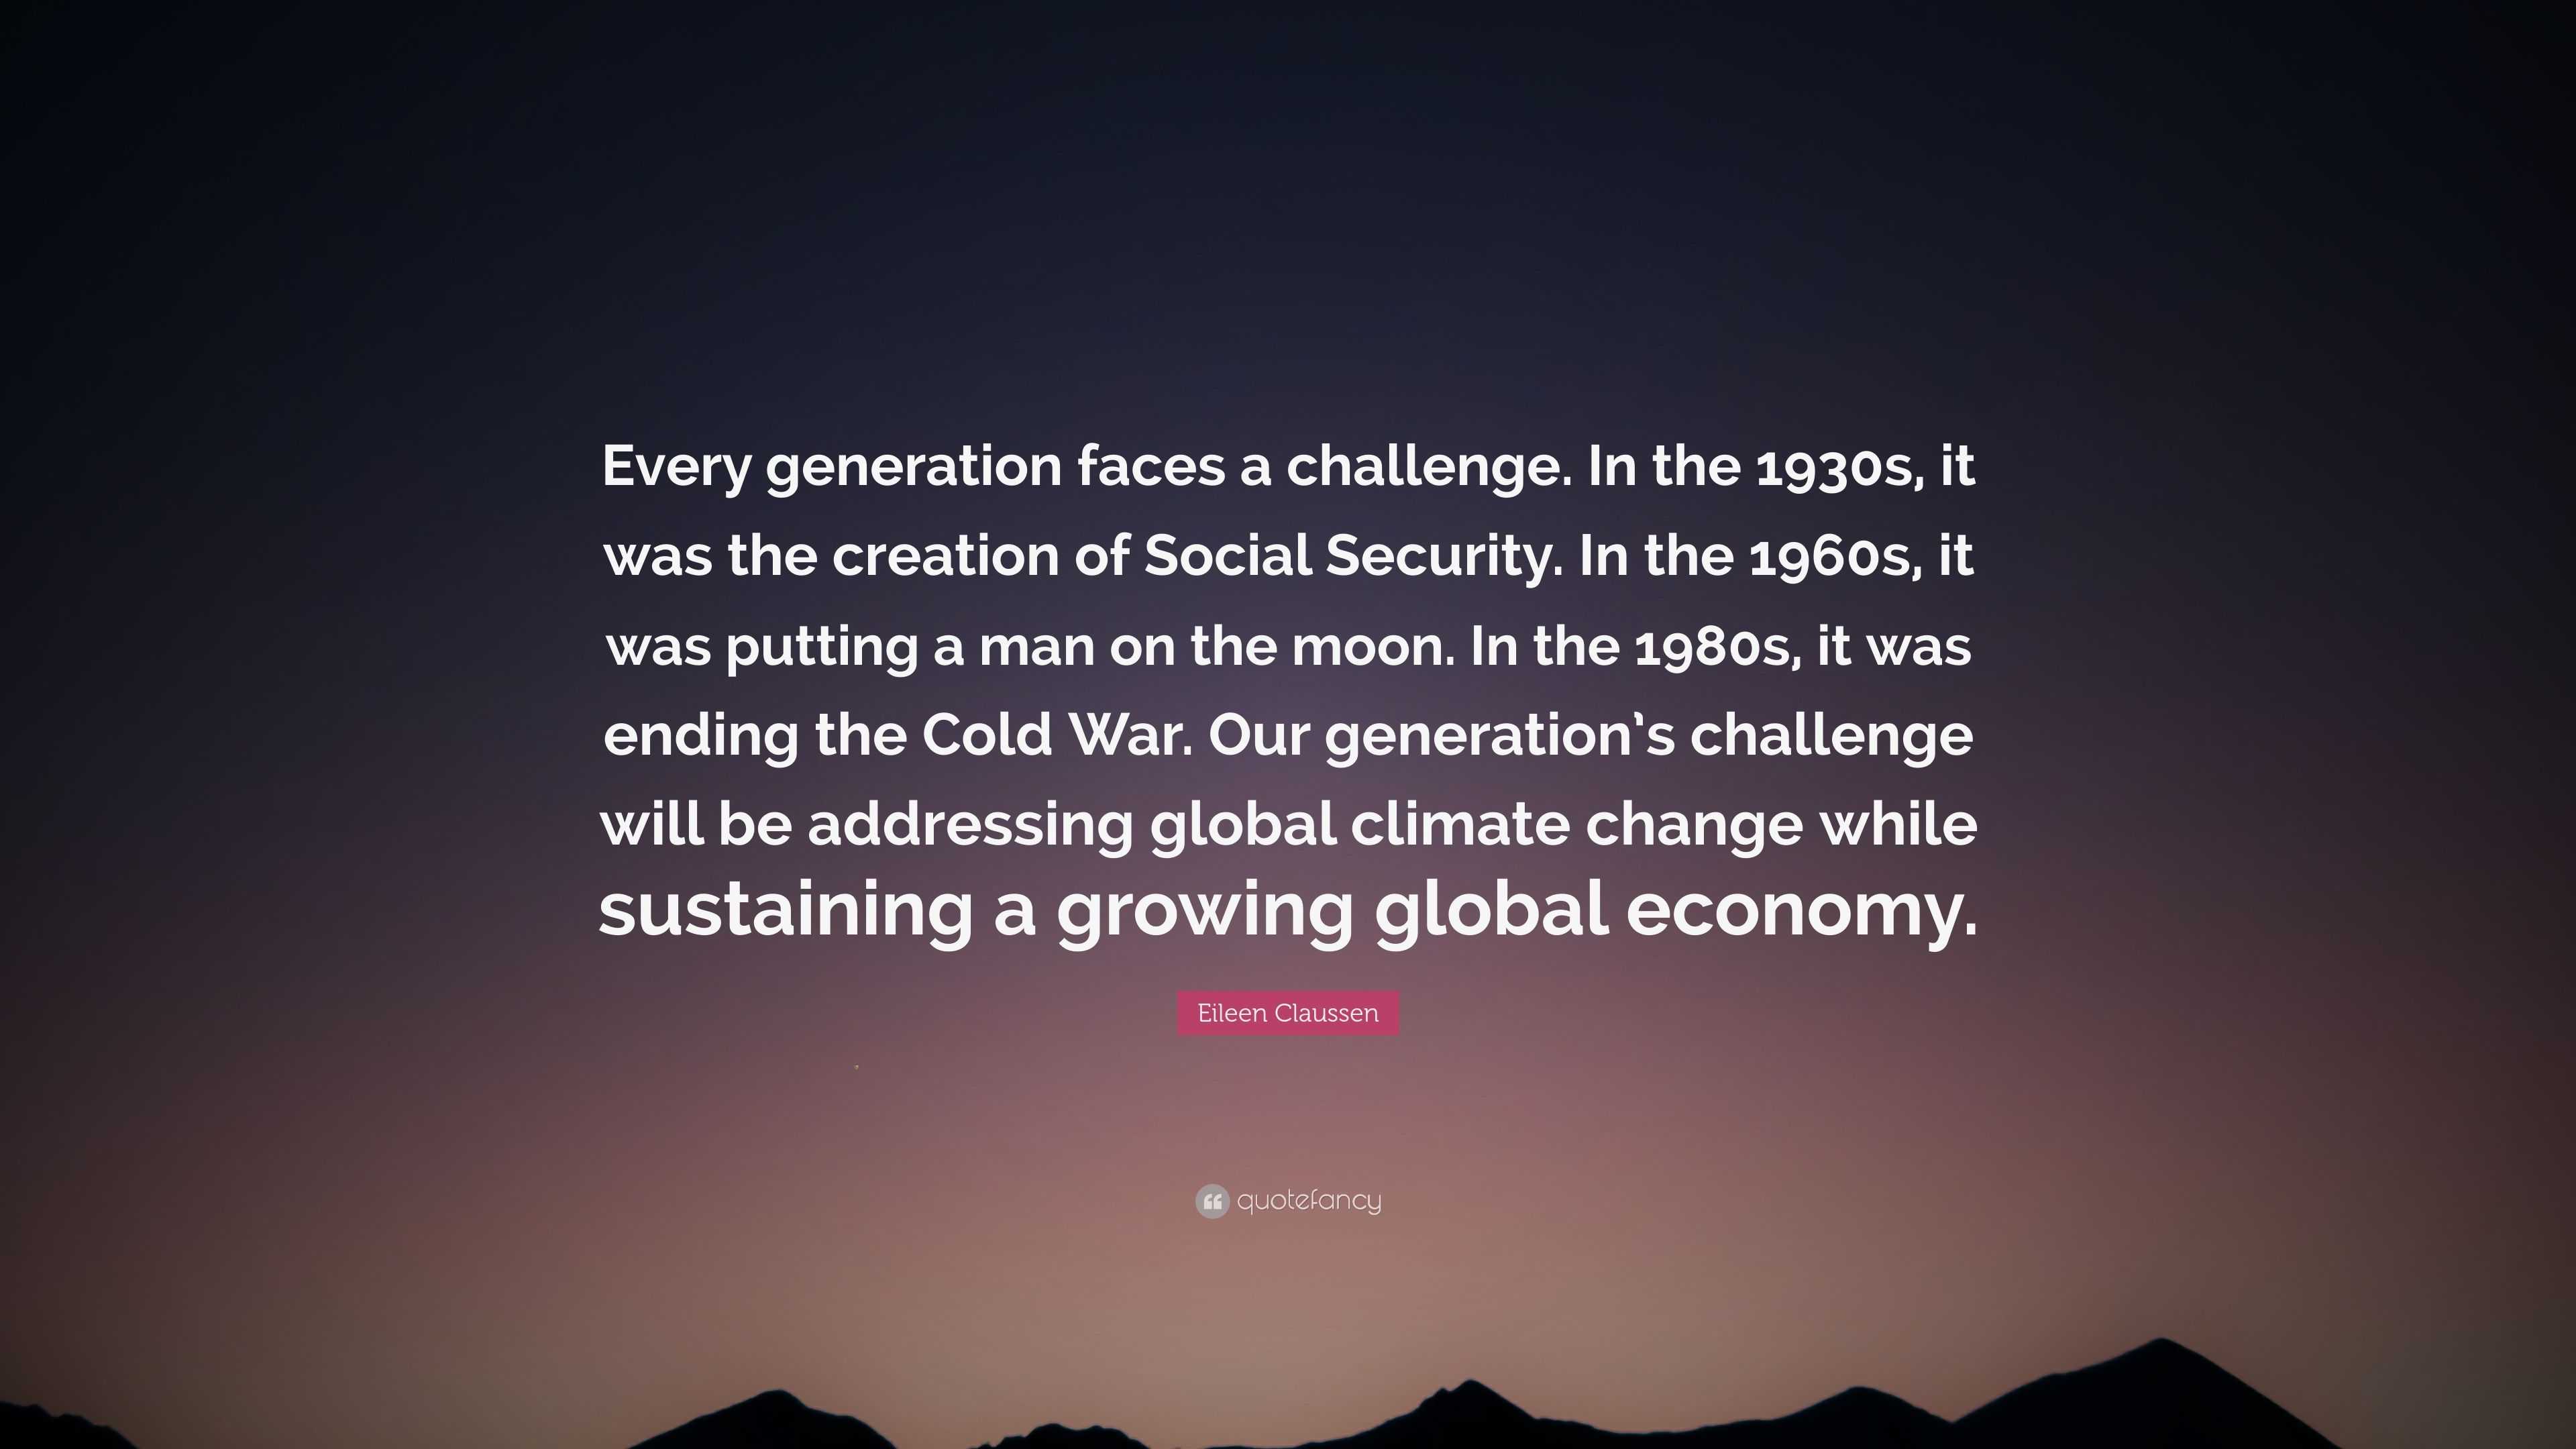 Eileen Claussen Quote: “Every generation faces a challenge. In the